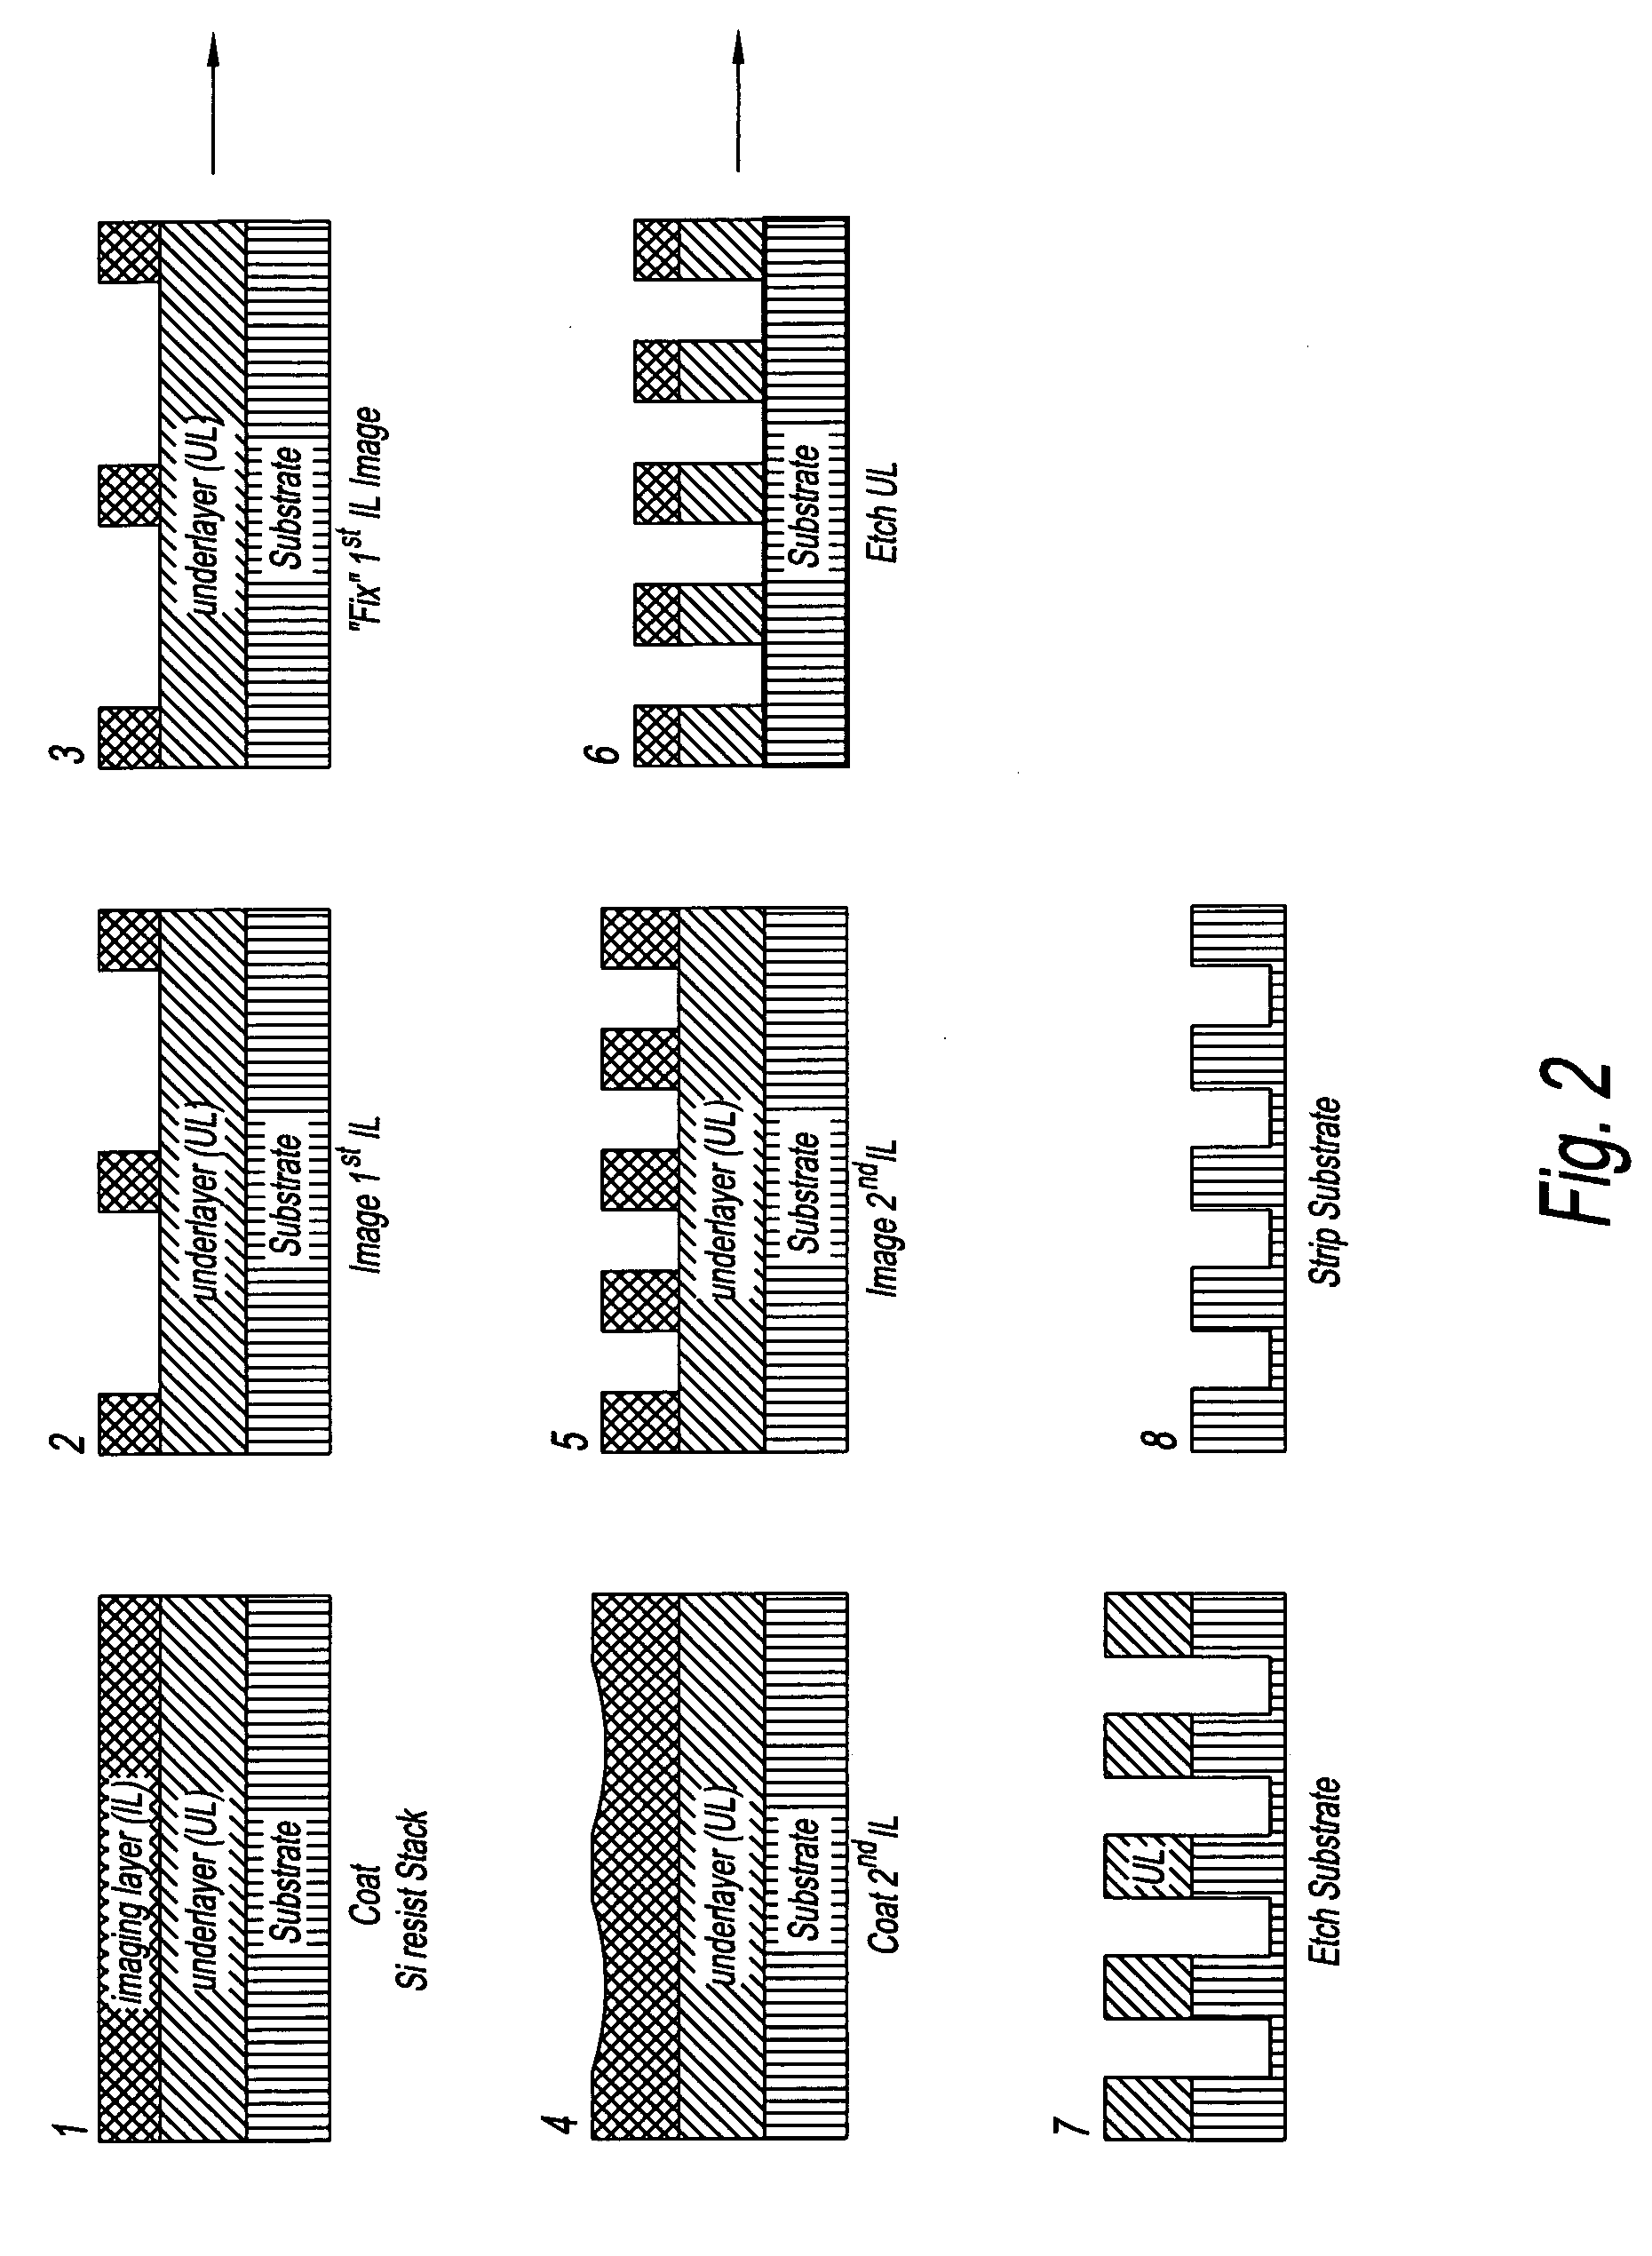 Device manufacturing process utilizing a double patterning process